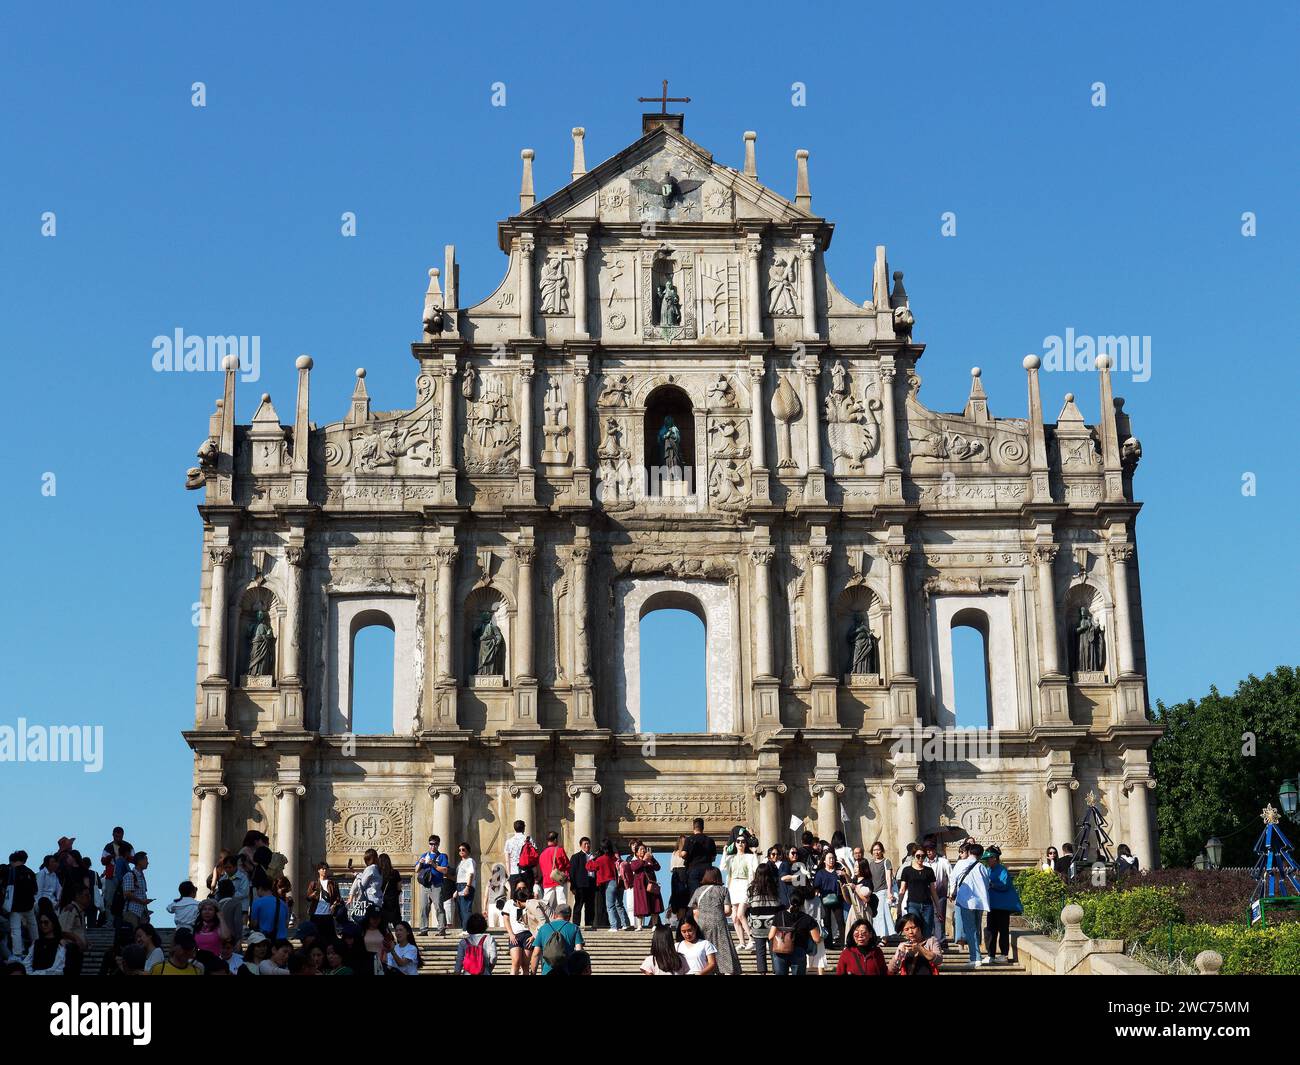 View looking up at the famous Ruins of St. Paul in Macau Stock Photo